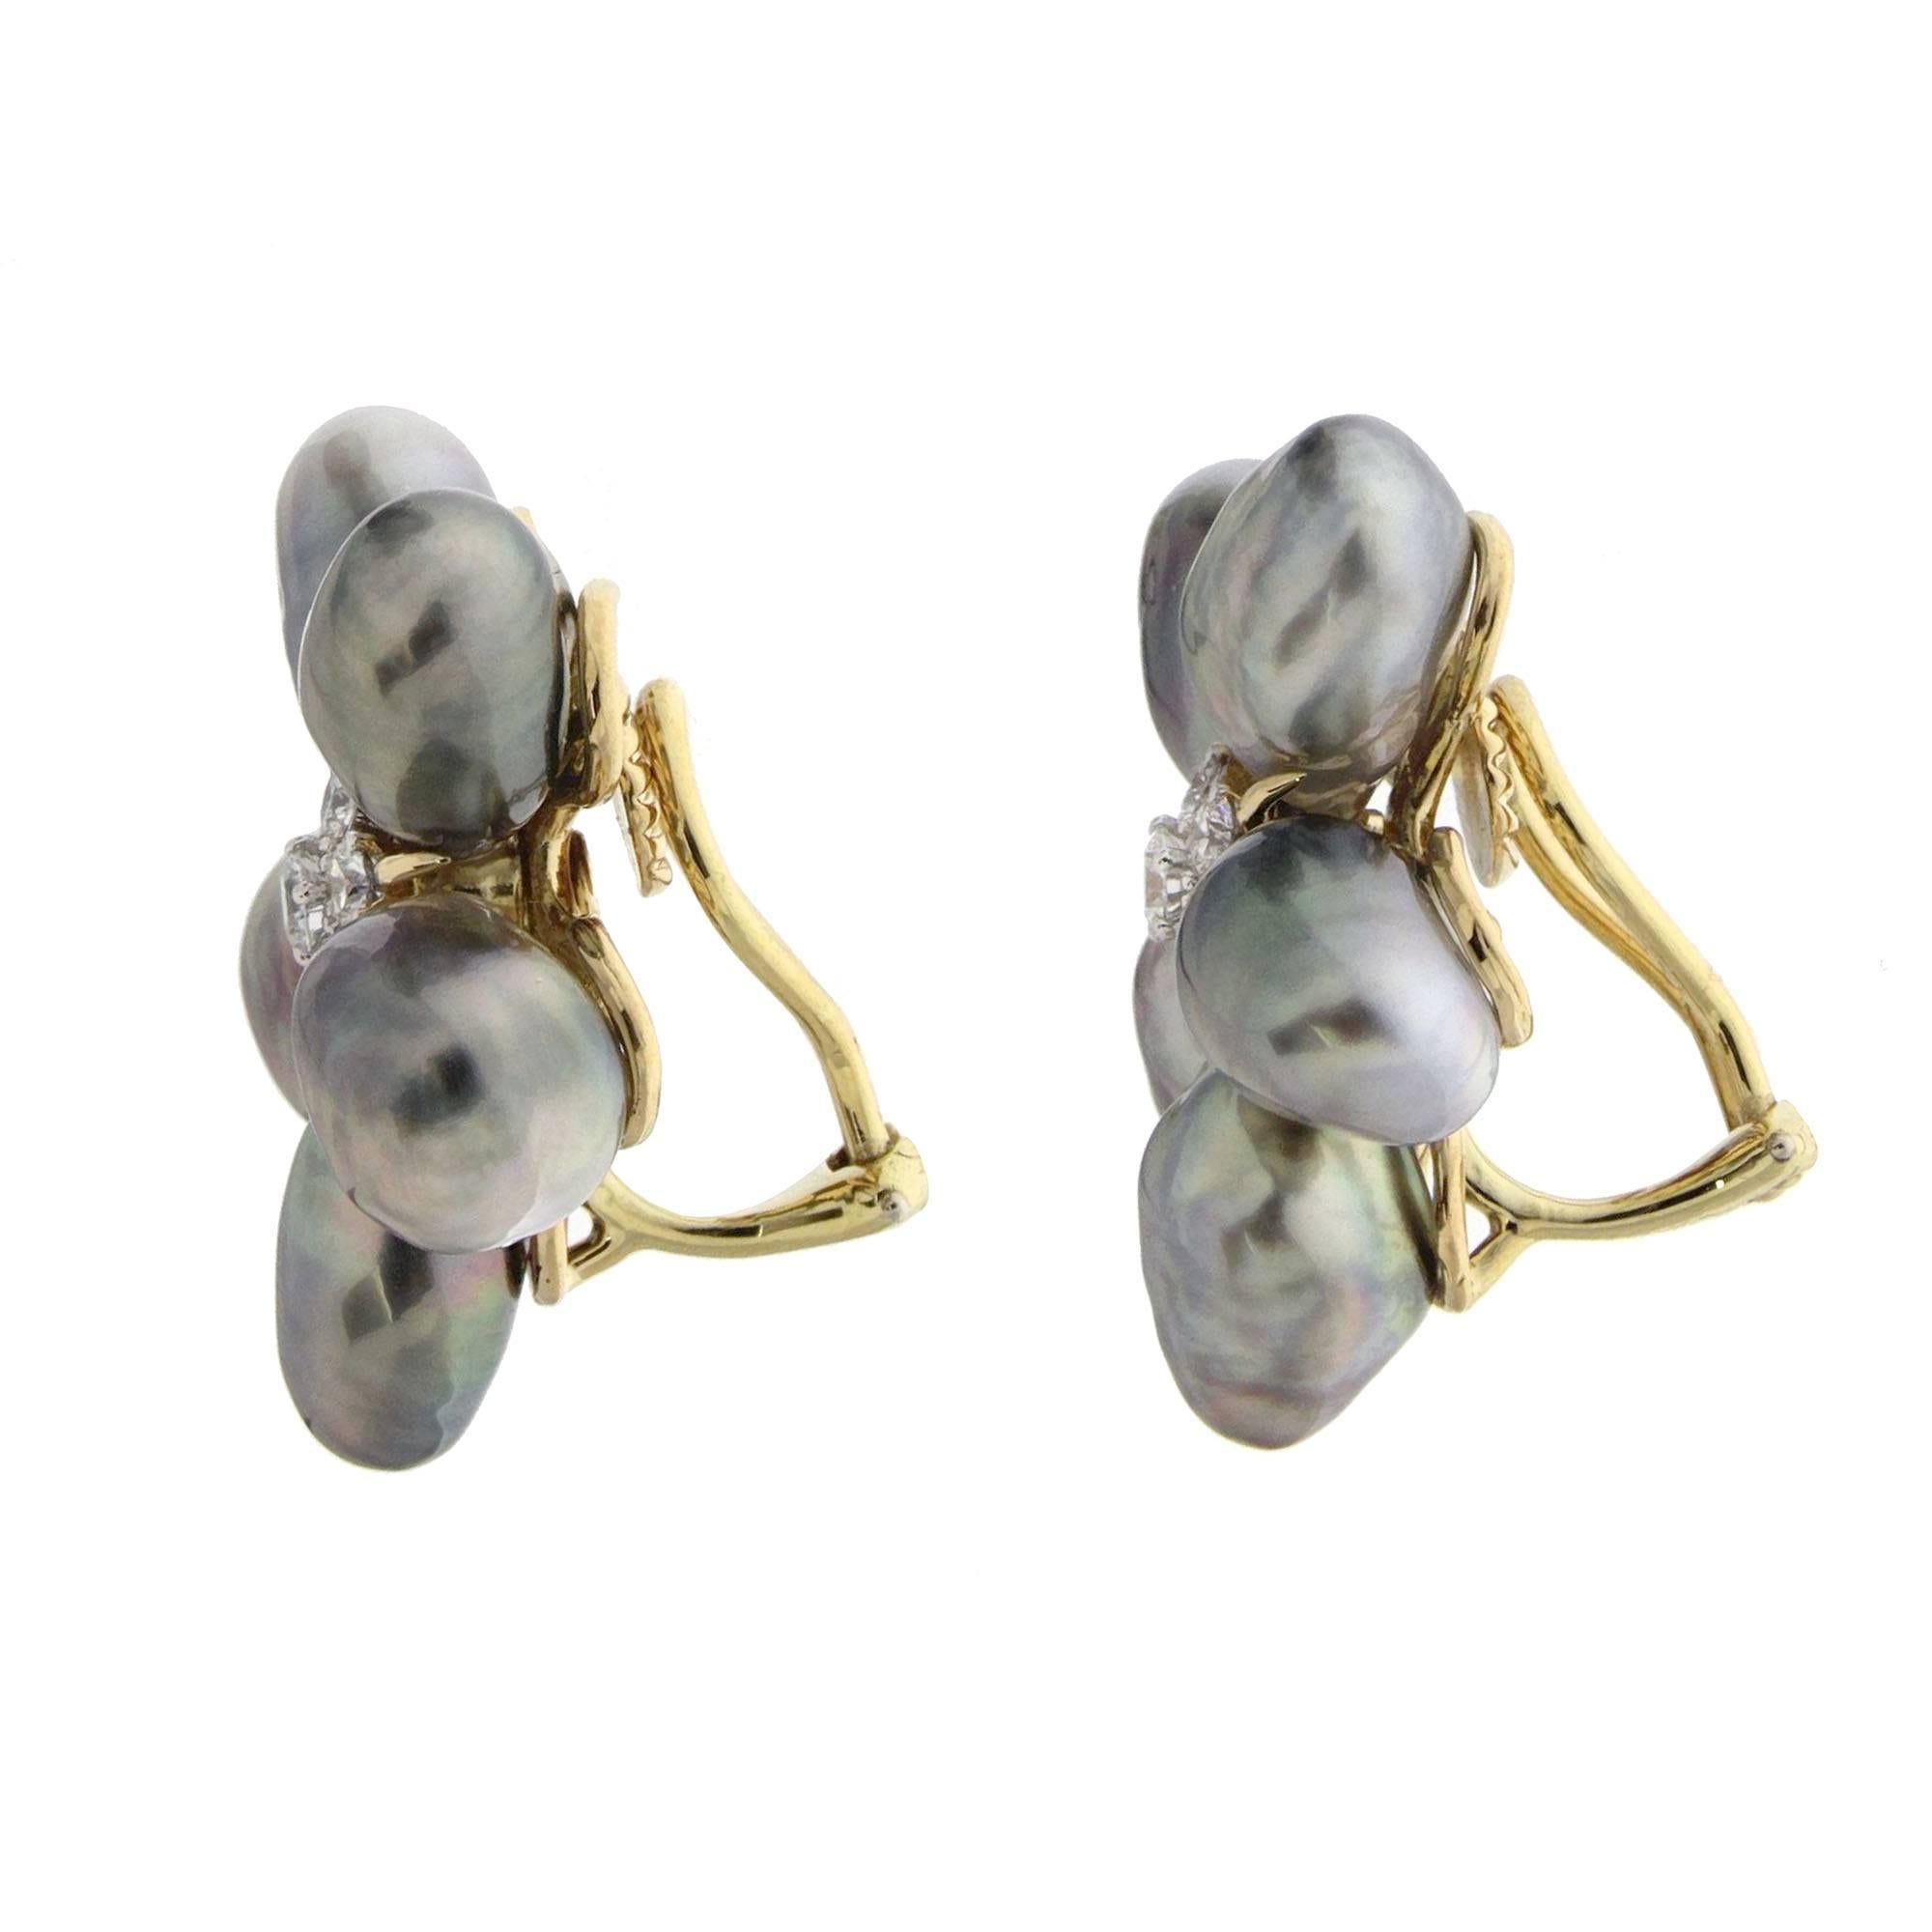 Cluster earrings with Silver Grey Keshi pearls and diamonds in the center, they are made in 18kt yellow gold and finished with clip backs.